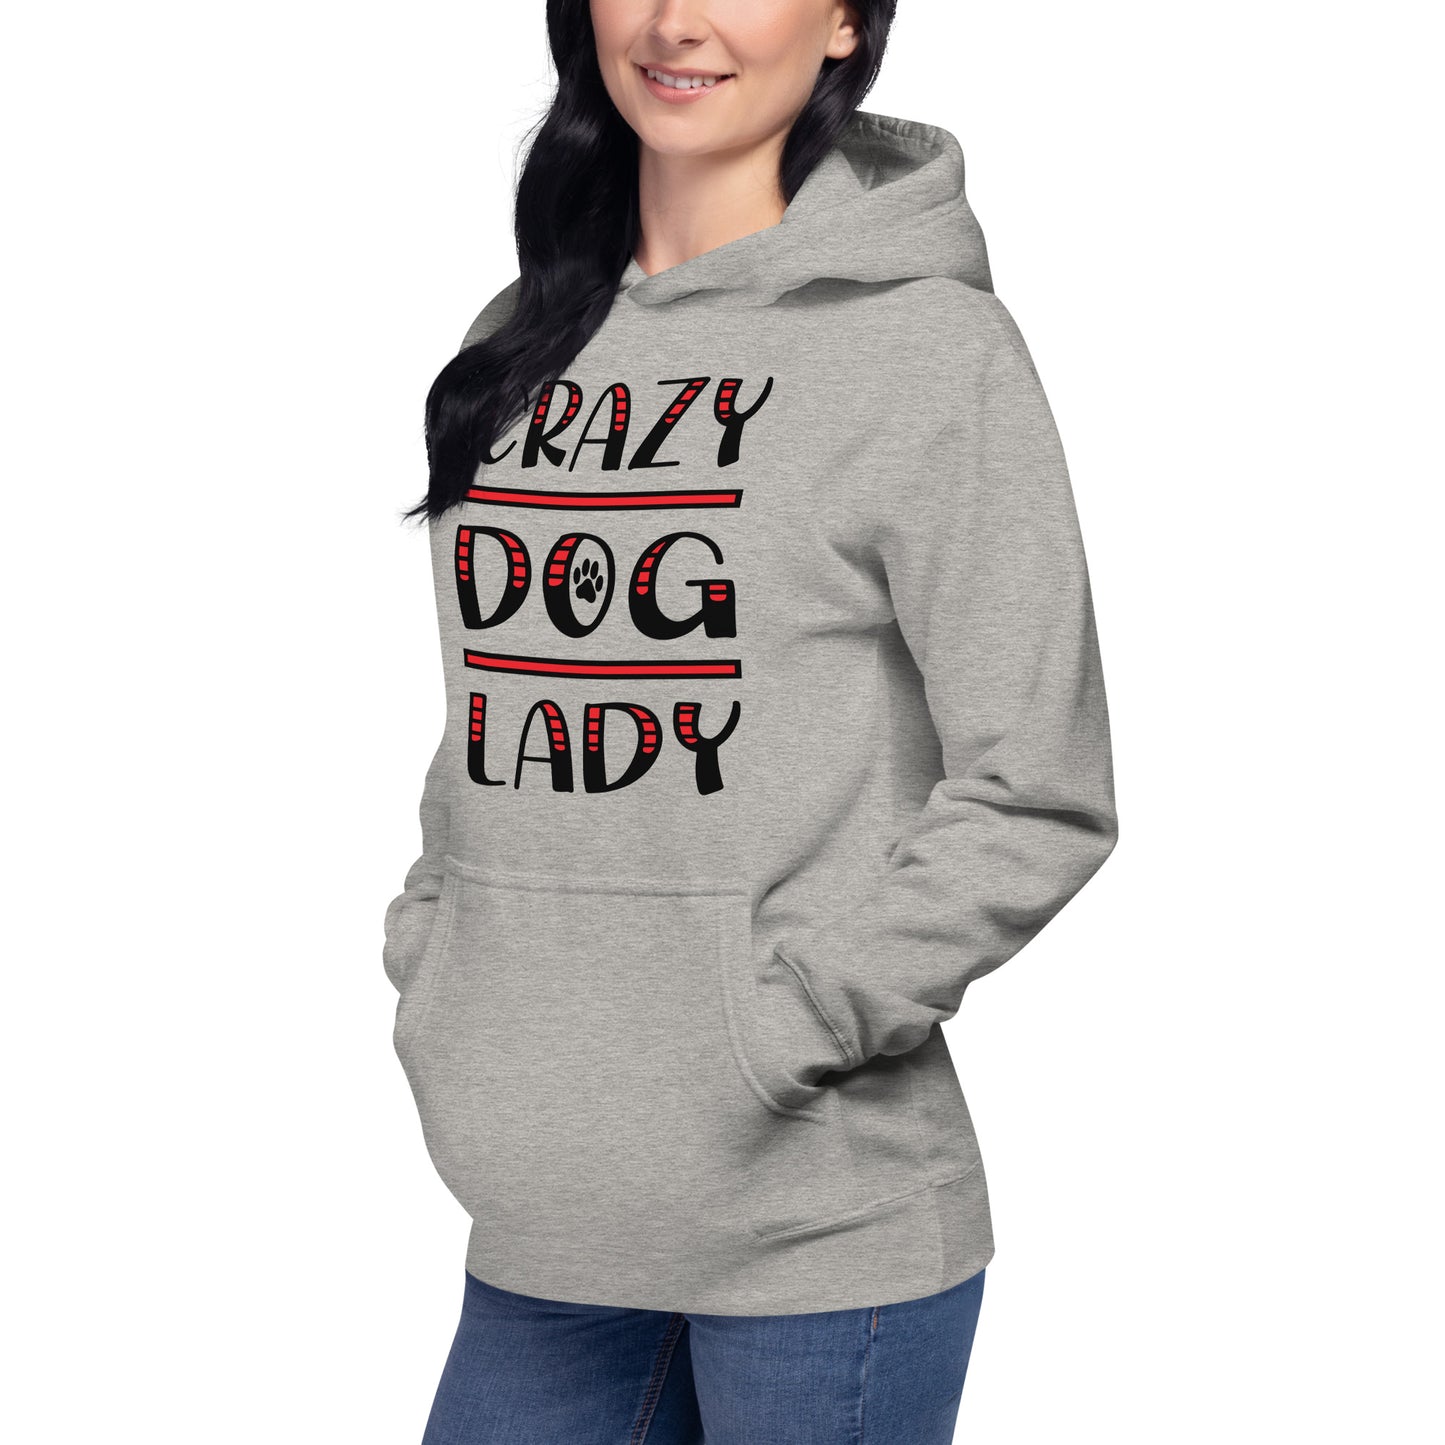 Crazy Dog Lady Women's Carbon Grey Hoodie by Dog Artistry 